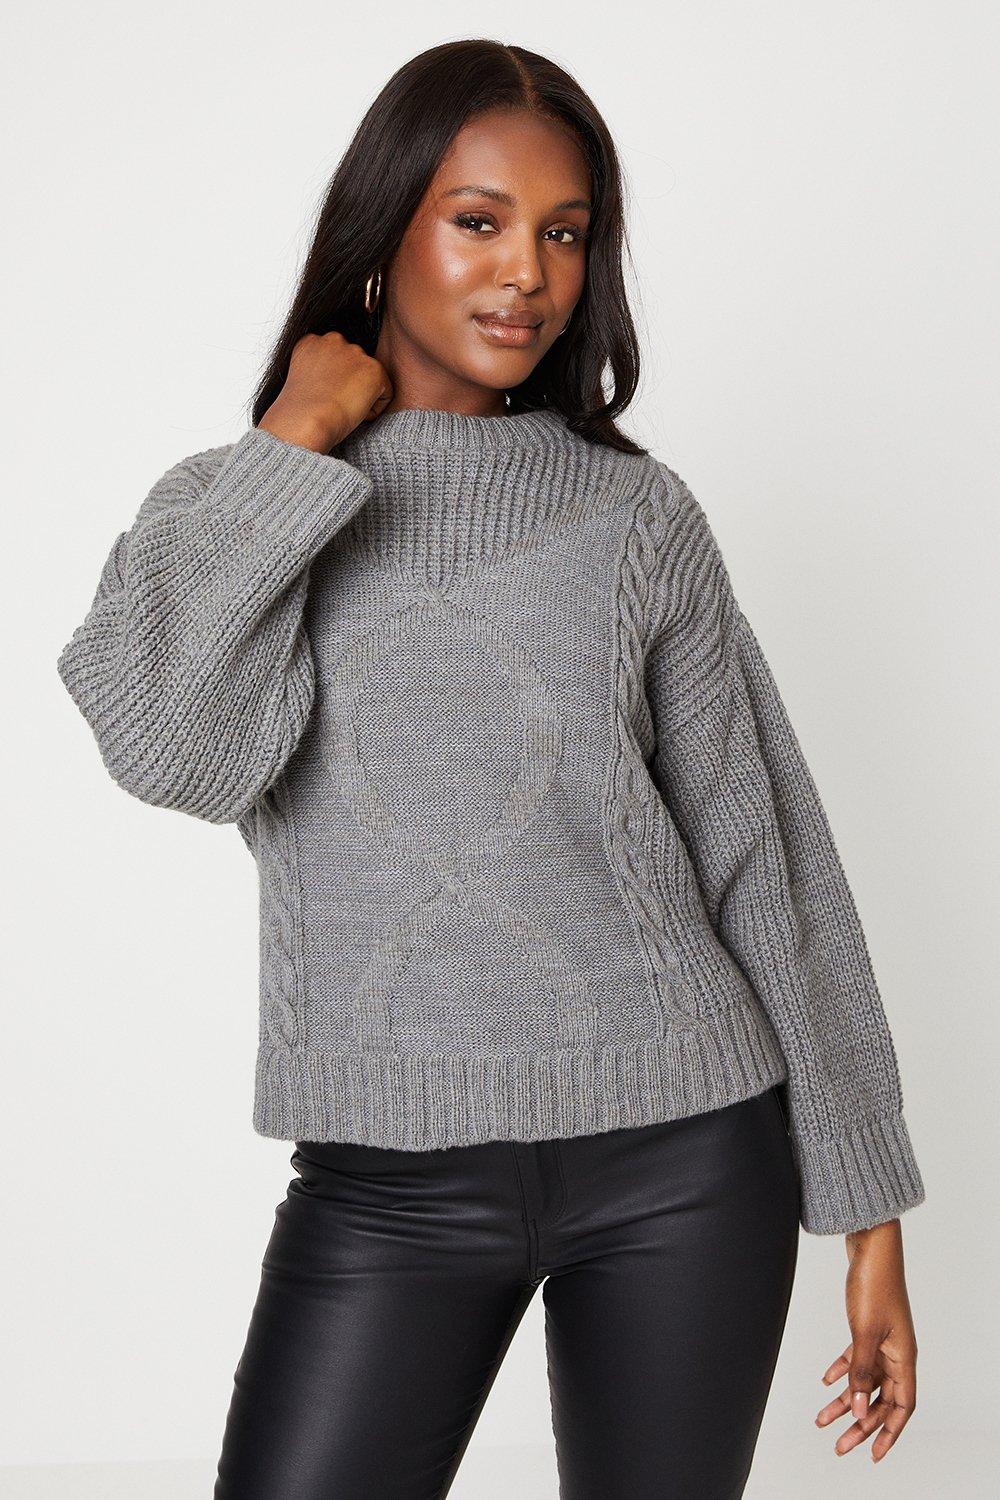 Women's Wide Sleeve Cable Fluffy Knit Jumper - grey - M